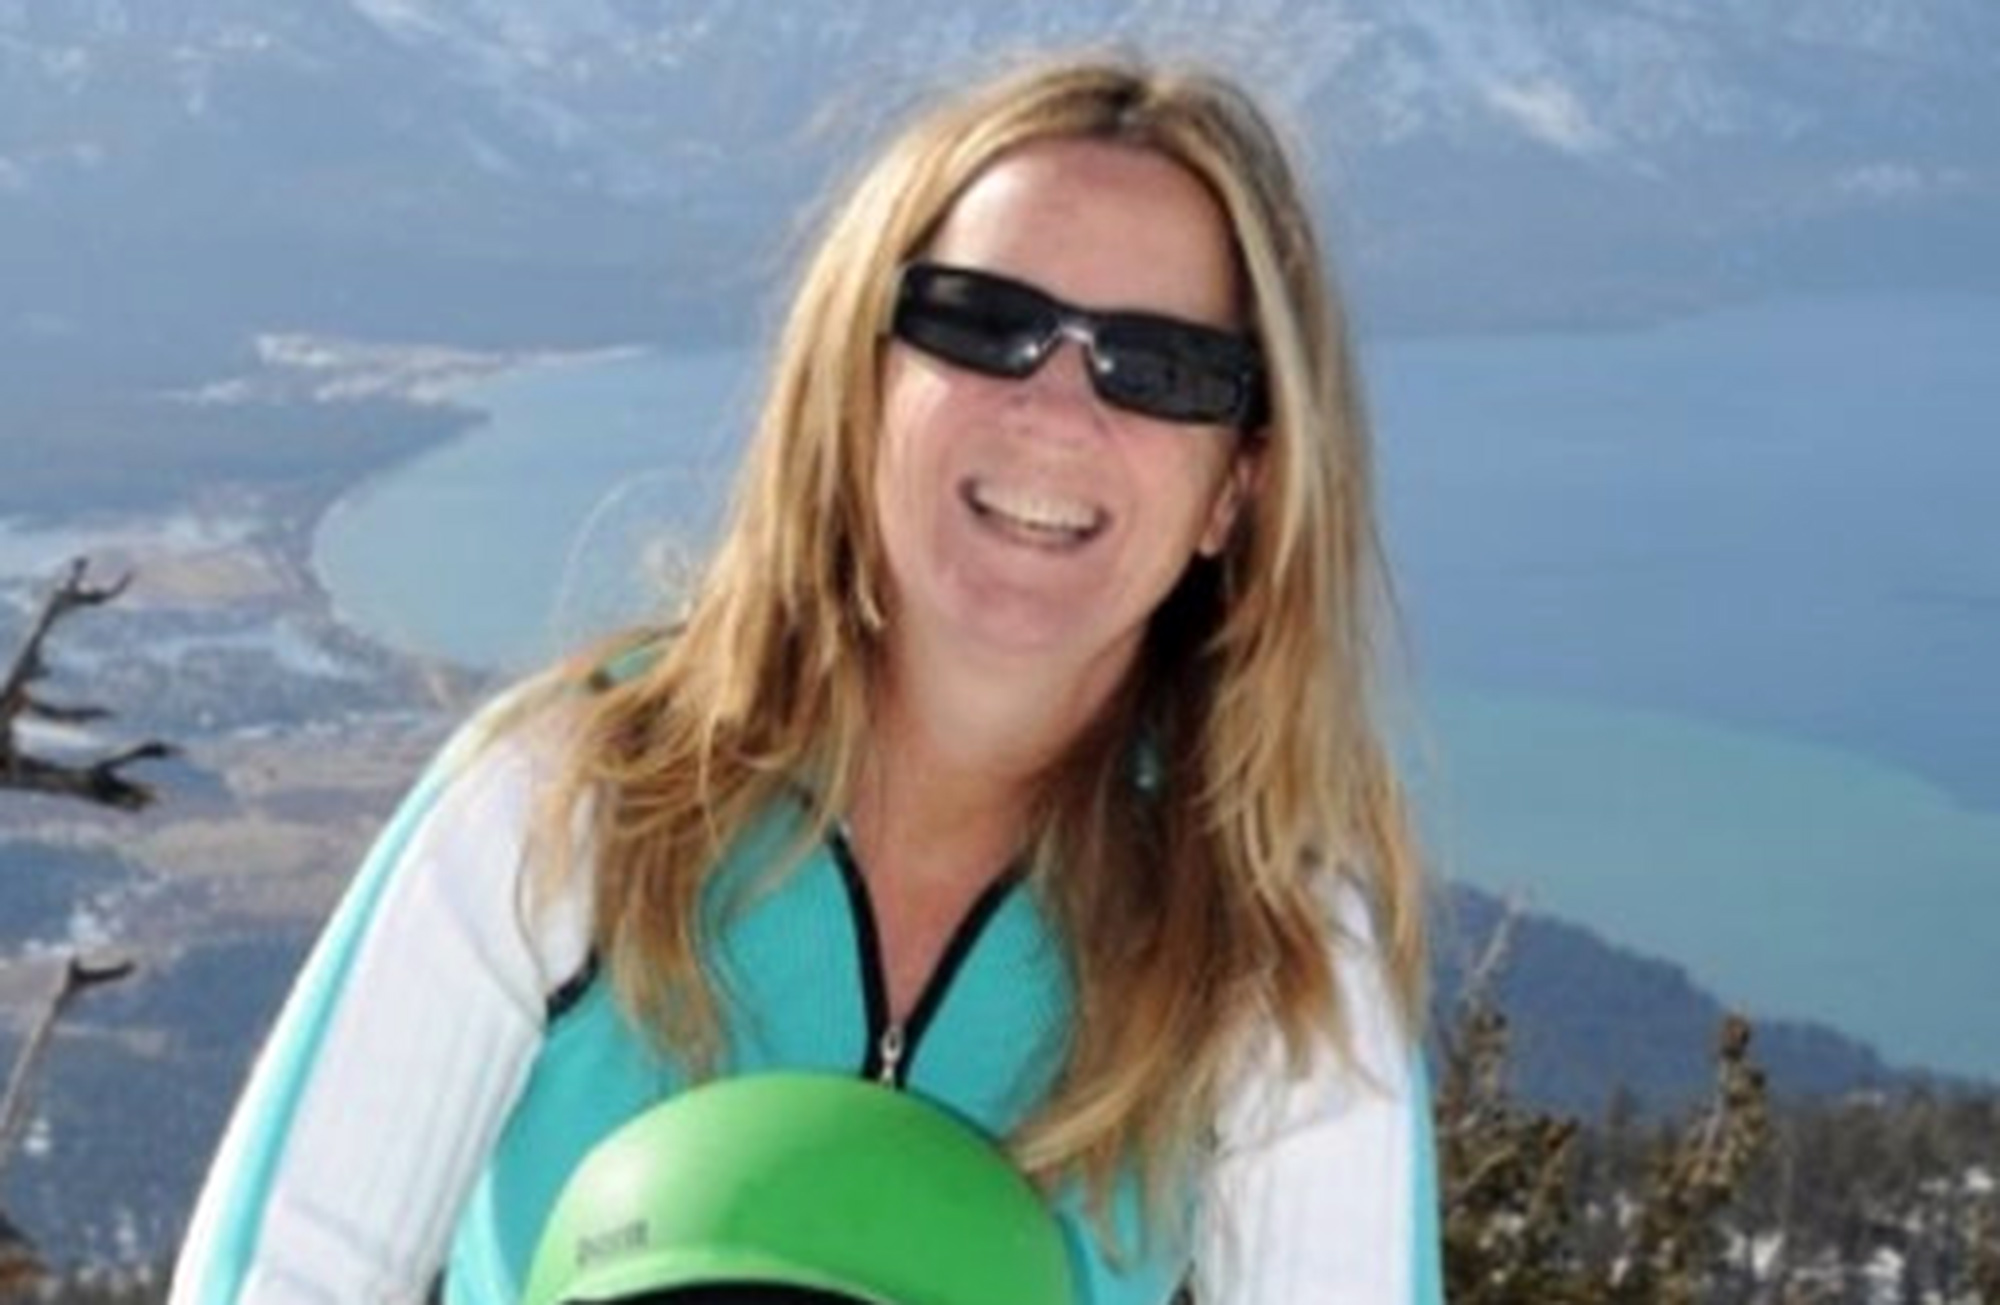 PHOTO: Professor Christine Blasey Ford is pictured in an undated image shared to ResearchGate, a website that described itself as, "a professional network for scientists and researchers."